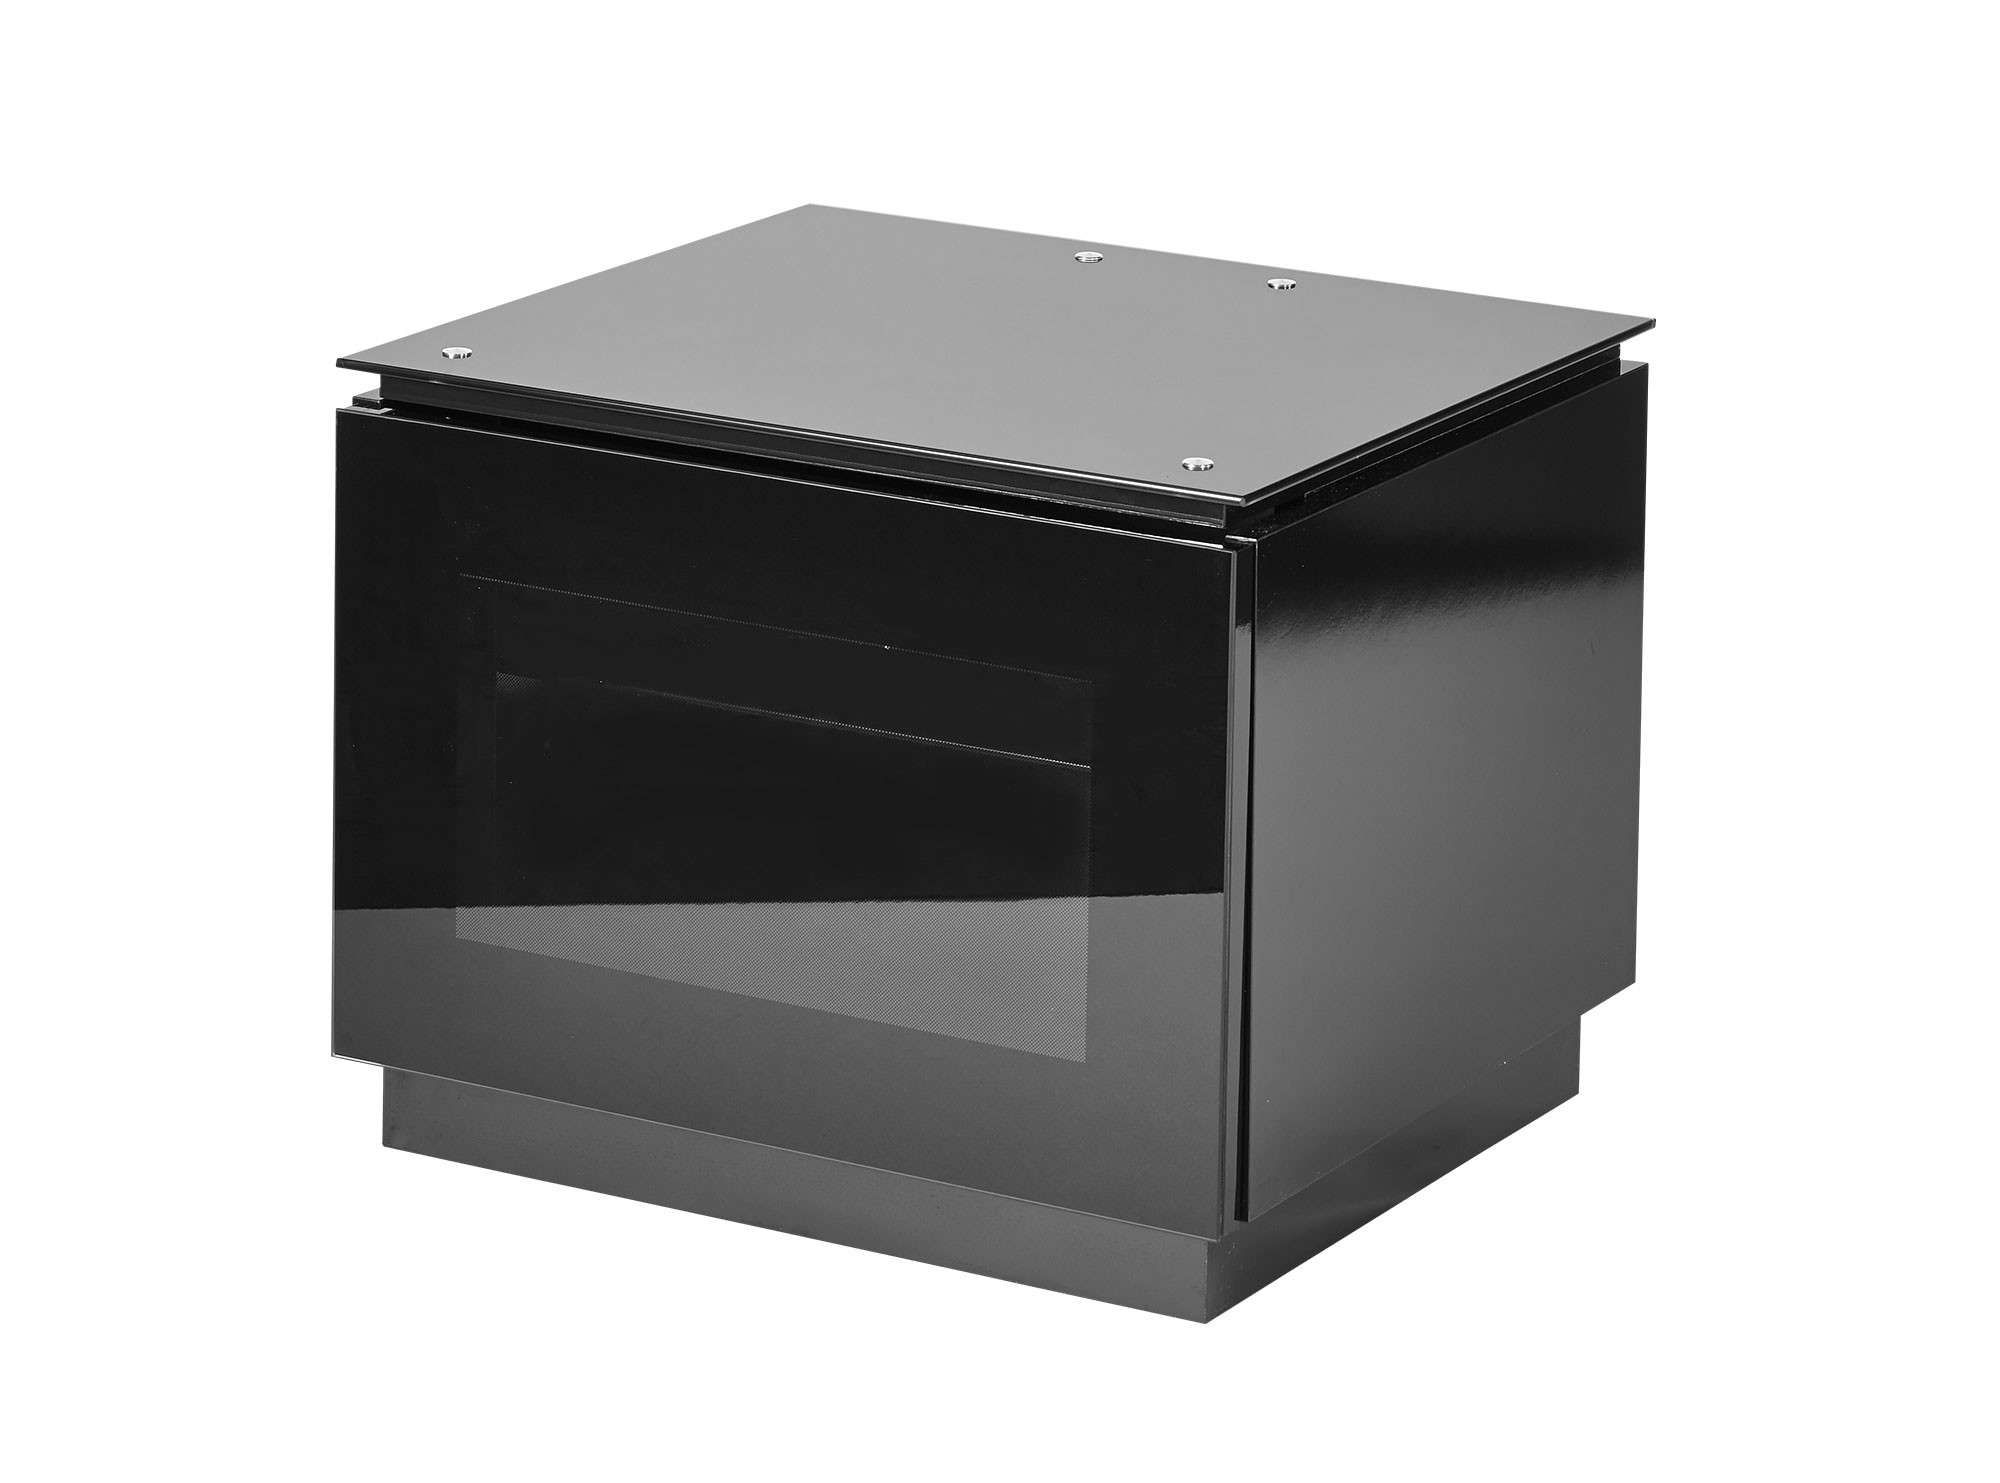 Small Black Gloss Tv Cabinet For Up To 32" Tv | Mmt D550 With Regard To Small Tv Cabinets (View 15 of 20)